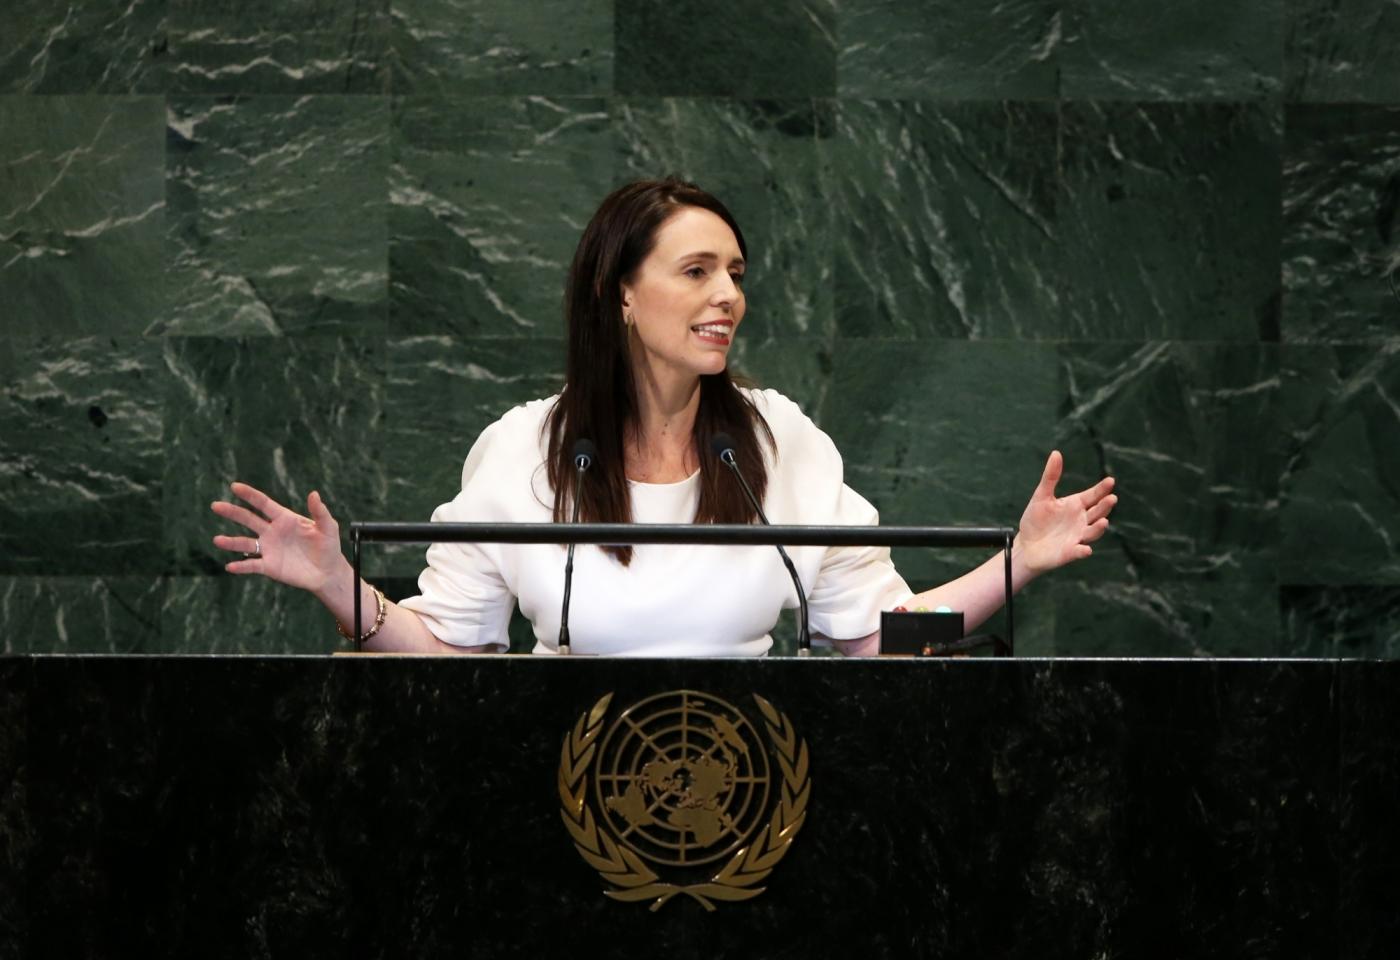 UNITED NATIONS, Sept. 28, 2018 (Xinhua) -- New Zealand Prime Minister Jacinda Ardern addresses the General Debate of the 73rd session of the United Nations General Assembly at the UN headquarters in New York on Sept. 27, 2018. (Xinhua/Qin Lang/IANS) by .